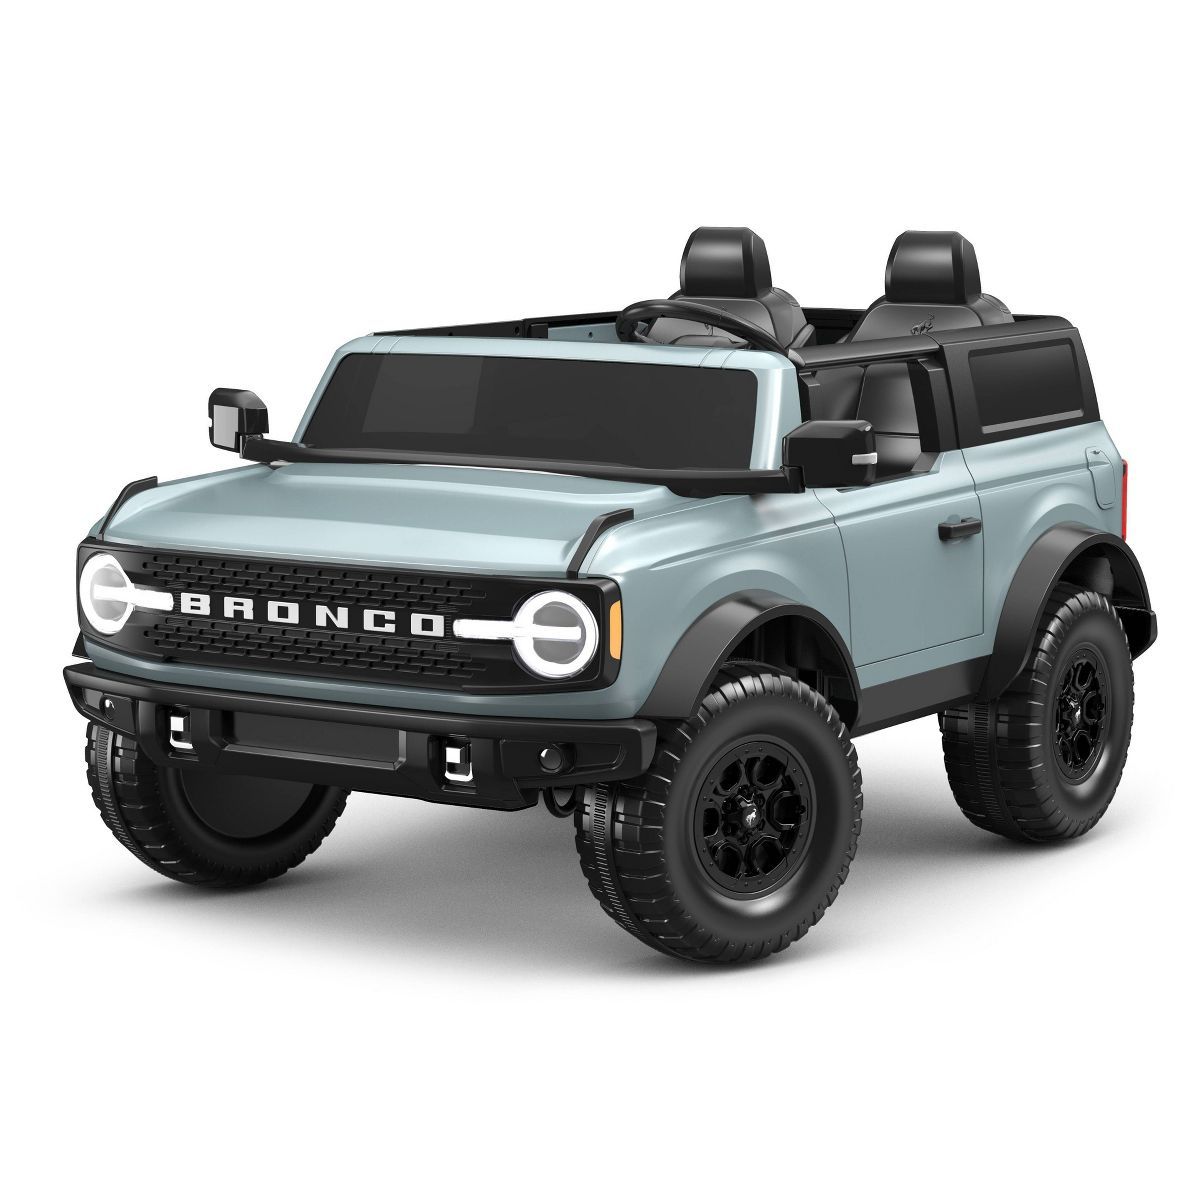 KidTrax 12V Ford Bronco Powered Ride-On - Gray | Target